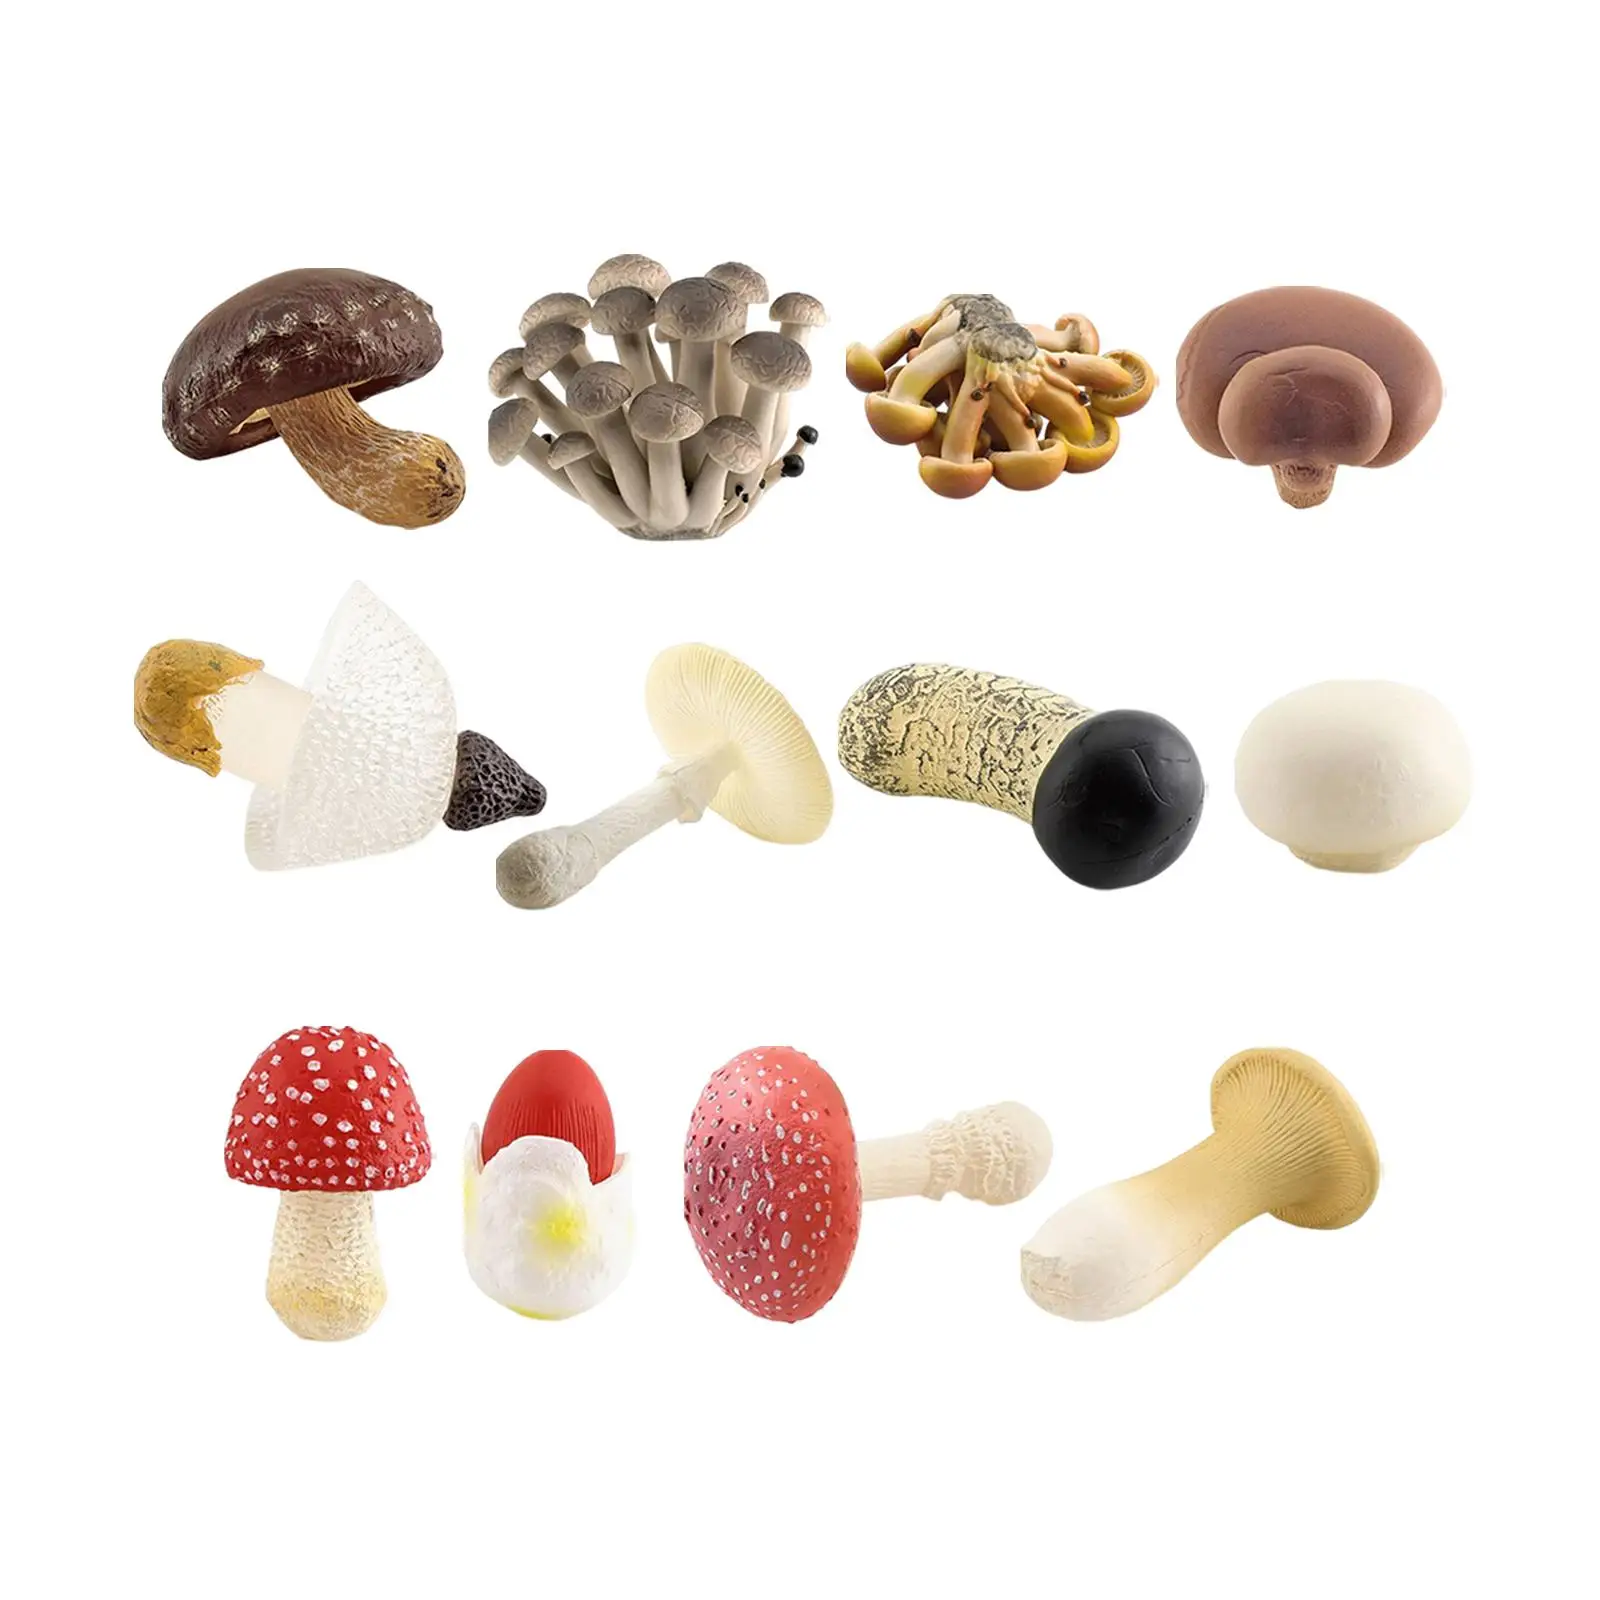 

4x Mushroom Model Cognition Toy Learning Activities Props Figurines for Scene Layouts Sand Table Scene Kindergarten Toddlers